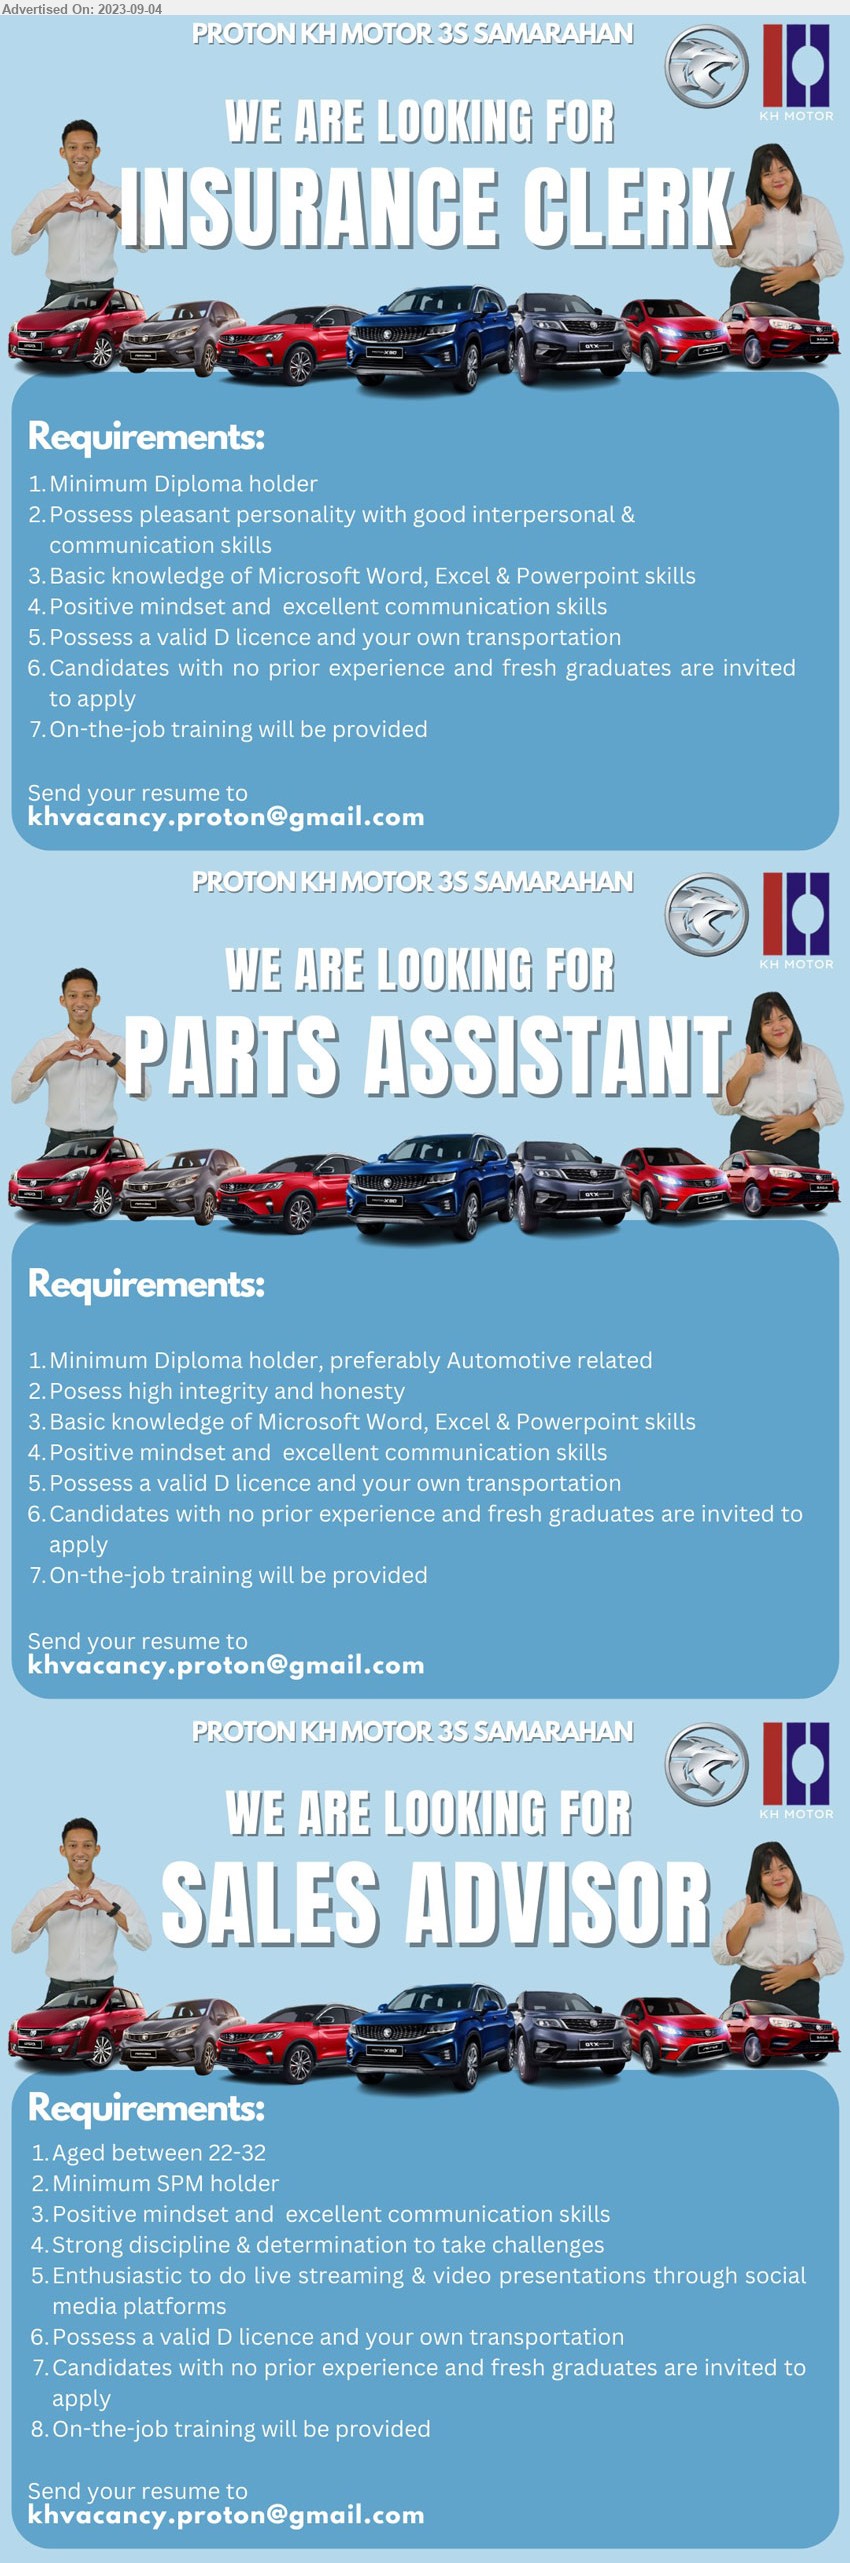 KH MOTOR SDN BHD - 1. INSURANCE CLERK (Kota Samarahan), Diploma basic knowledge of MS Word, Excel & PowerPoint skills,...
2. PASRTS ASSISTANT (Kota Samarahan), Diploma, preferred Automation related, ,...
3. SALES ADVISOR (Kota Samarahan), SPM, candidates with no prior exp. and fresh graduates are invited to apply,...
Email resume to ...